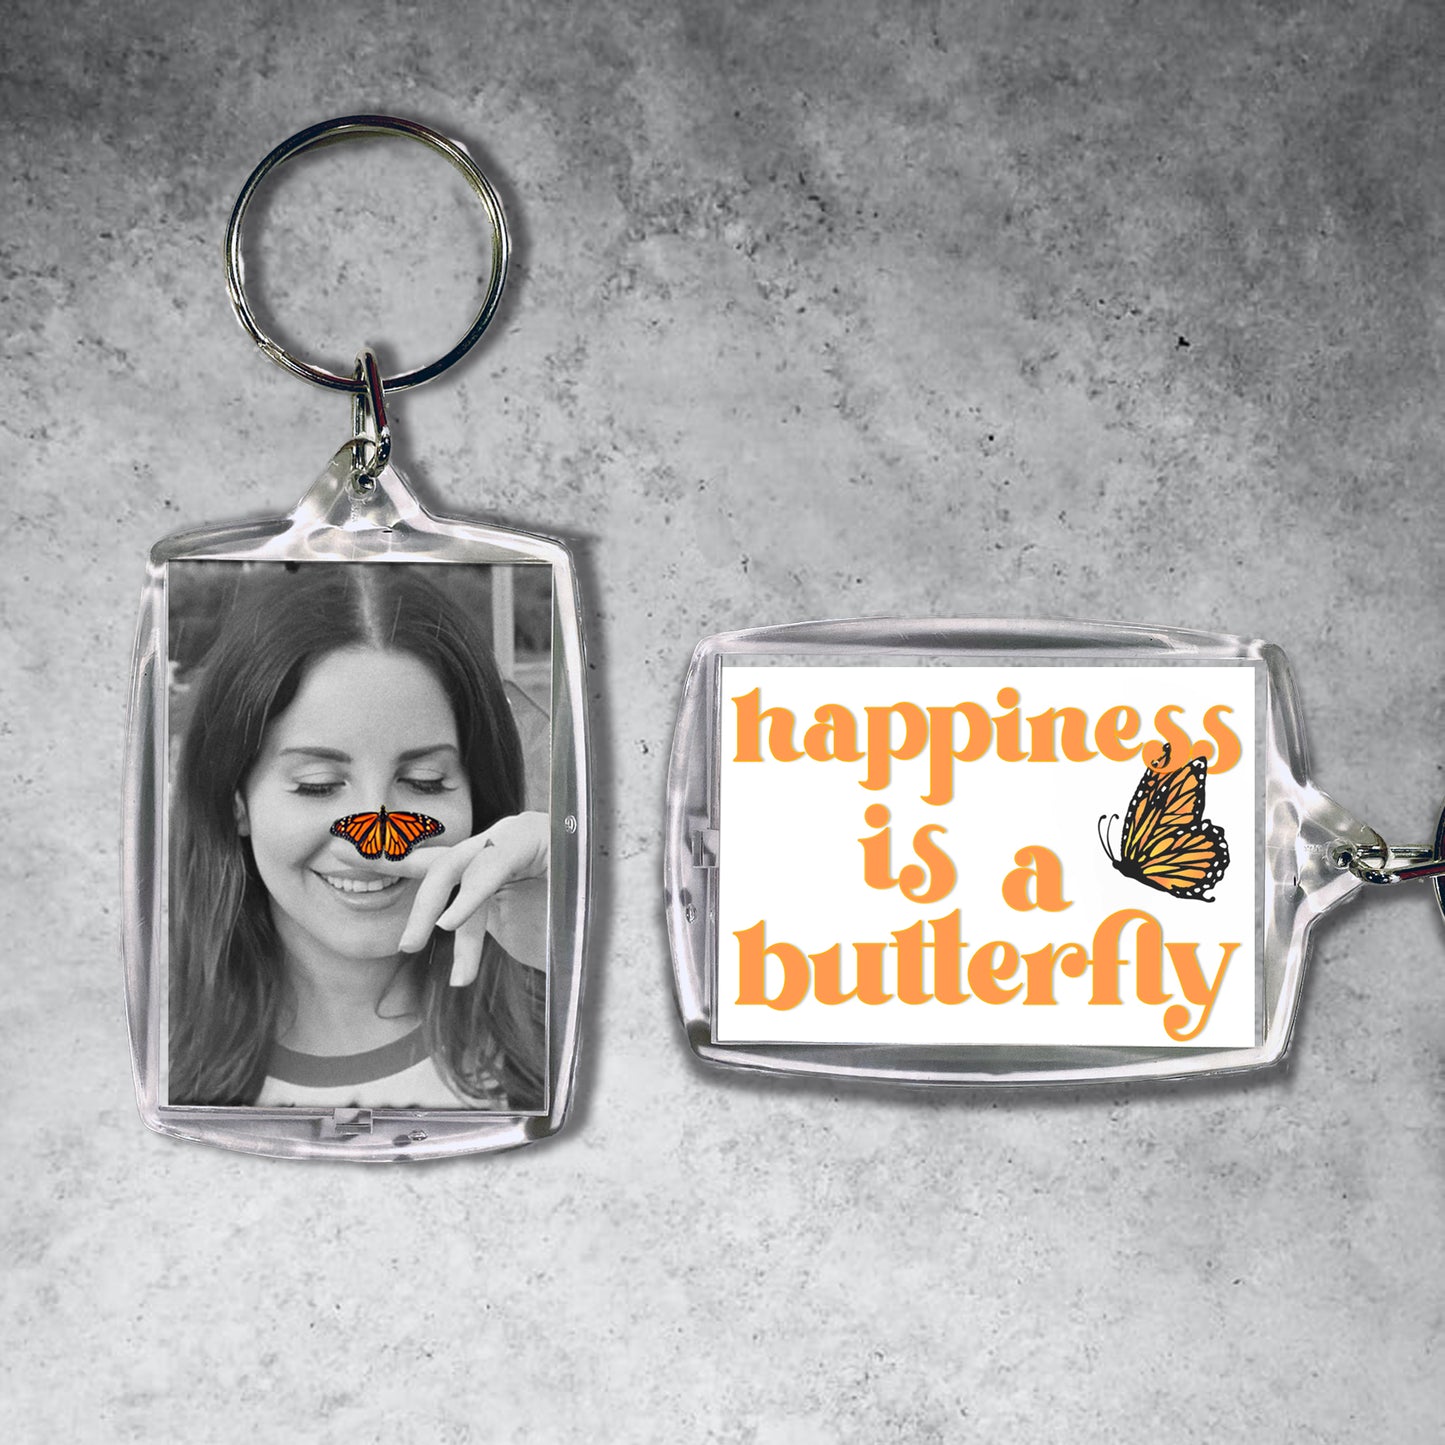 happiness is a butterfly keychain